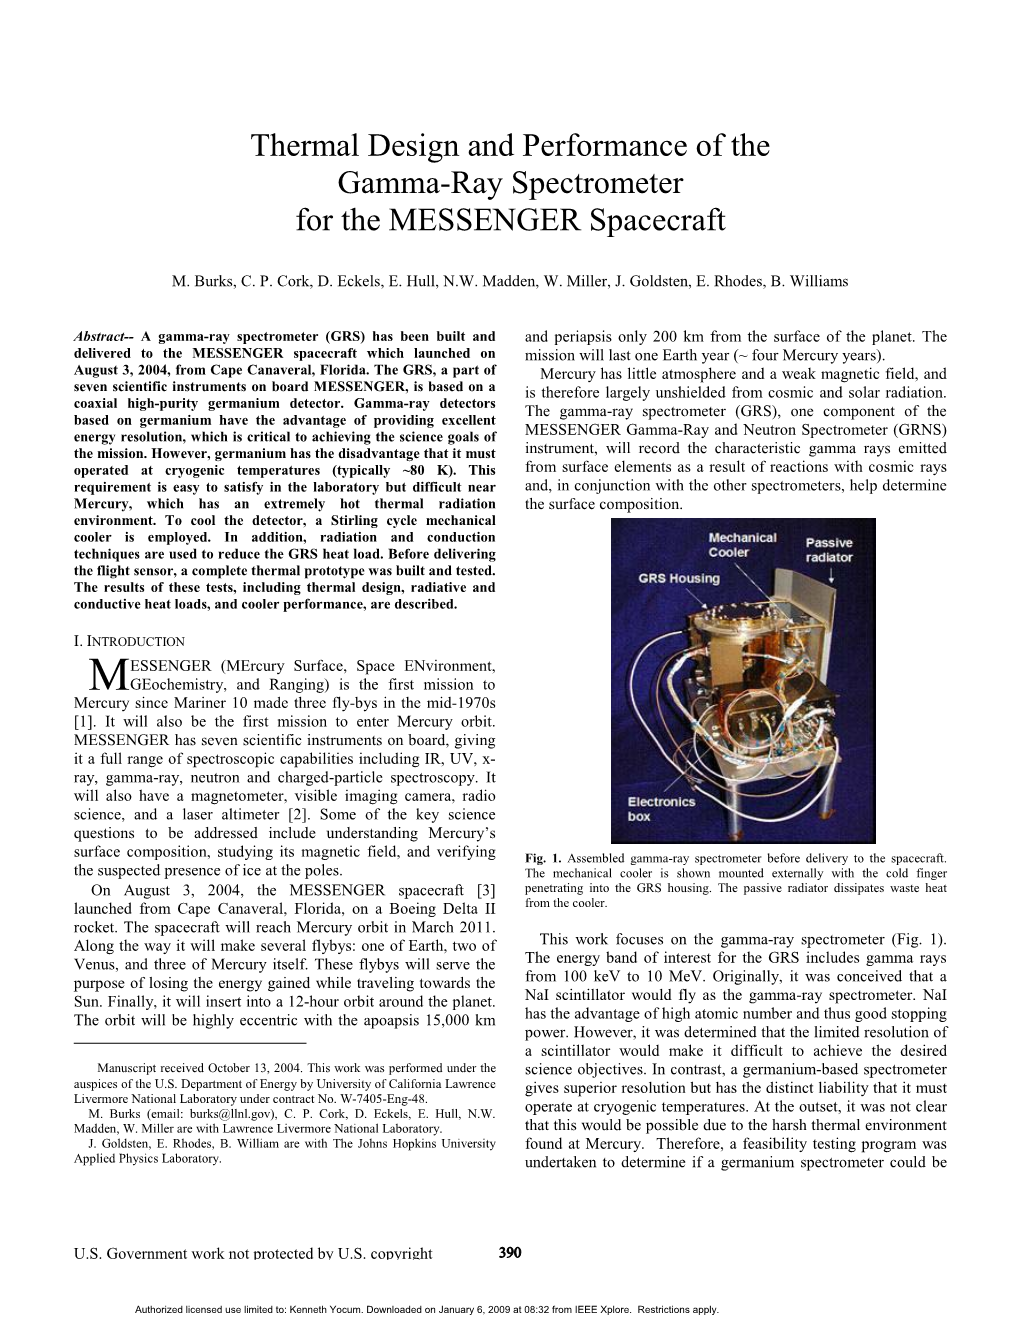 Thermal Design and Performance of the Gamma-Ray Spectrometer for the MESSENGER Spacecraft